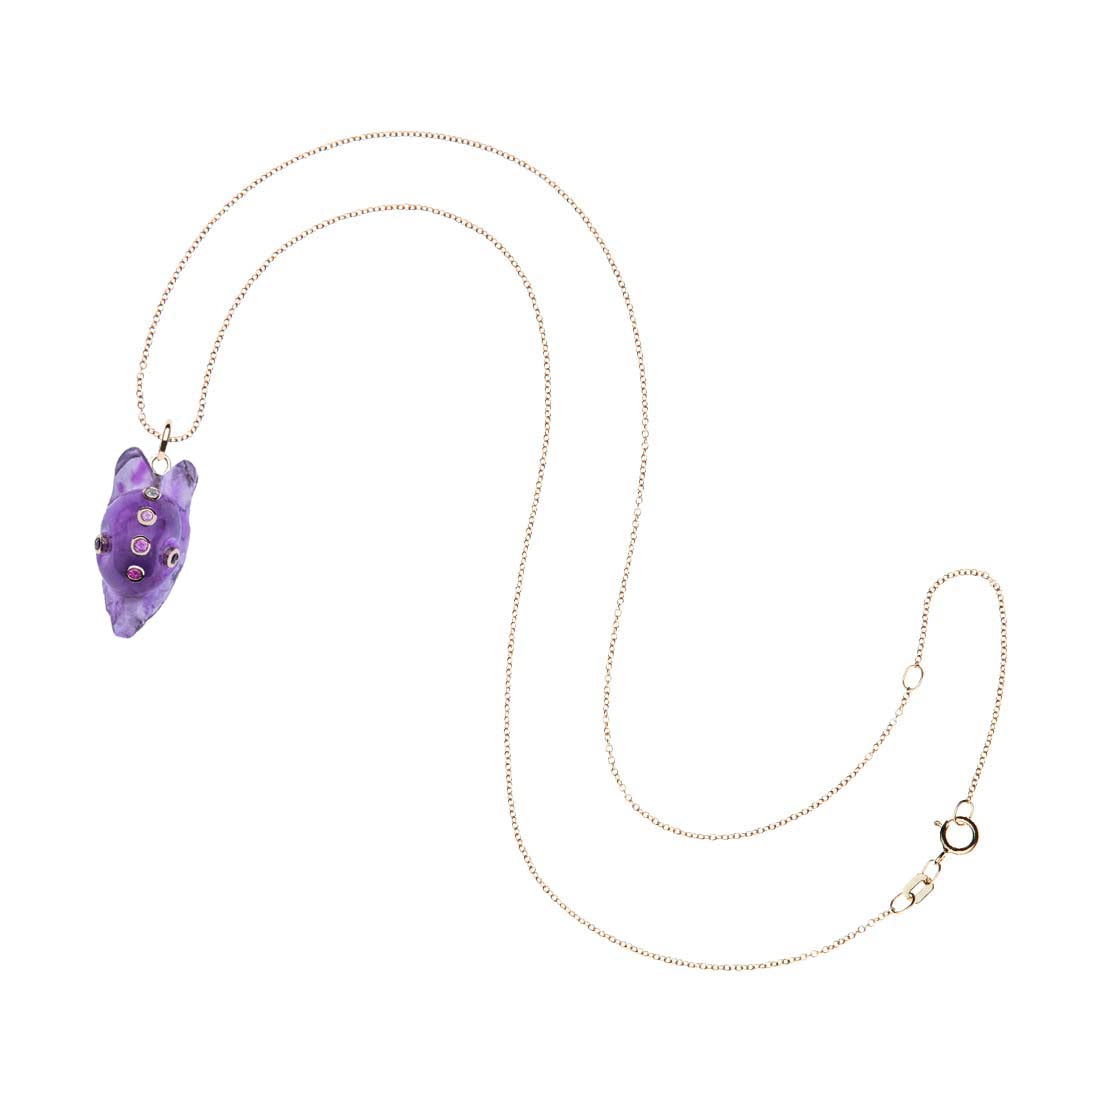 JOY Carved Amethyst Snail in Solid Gold